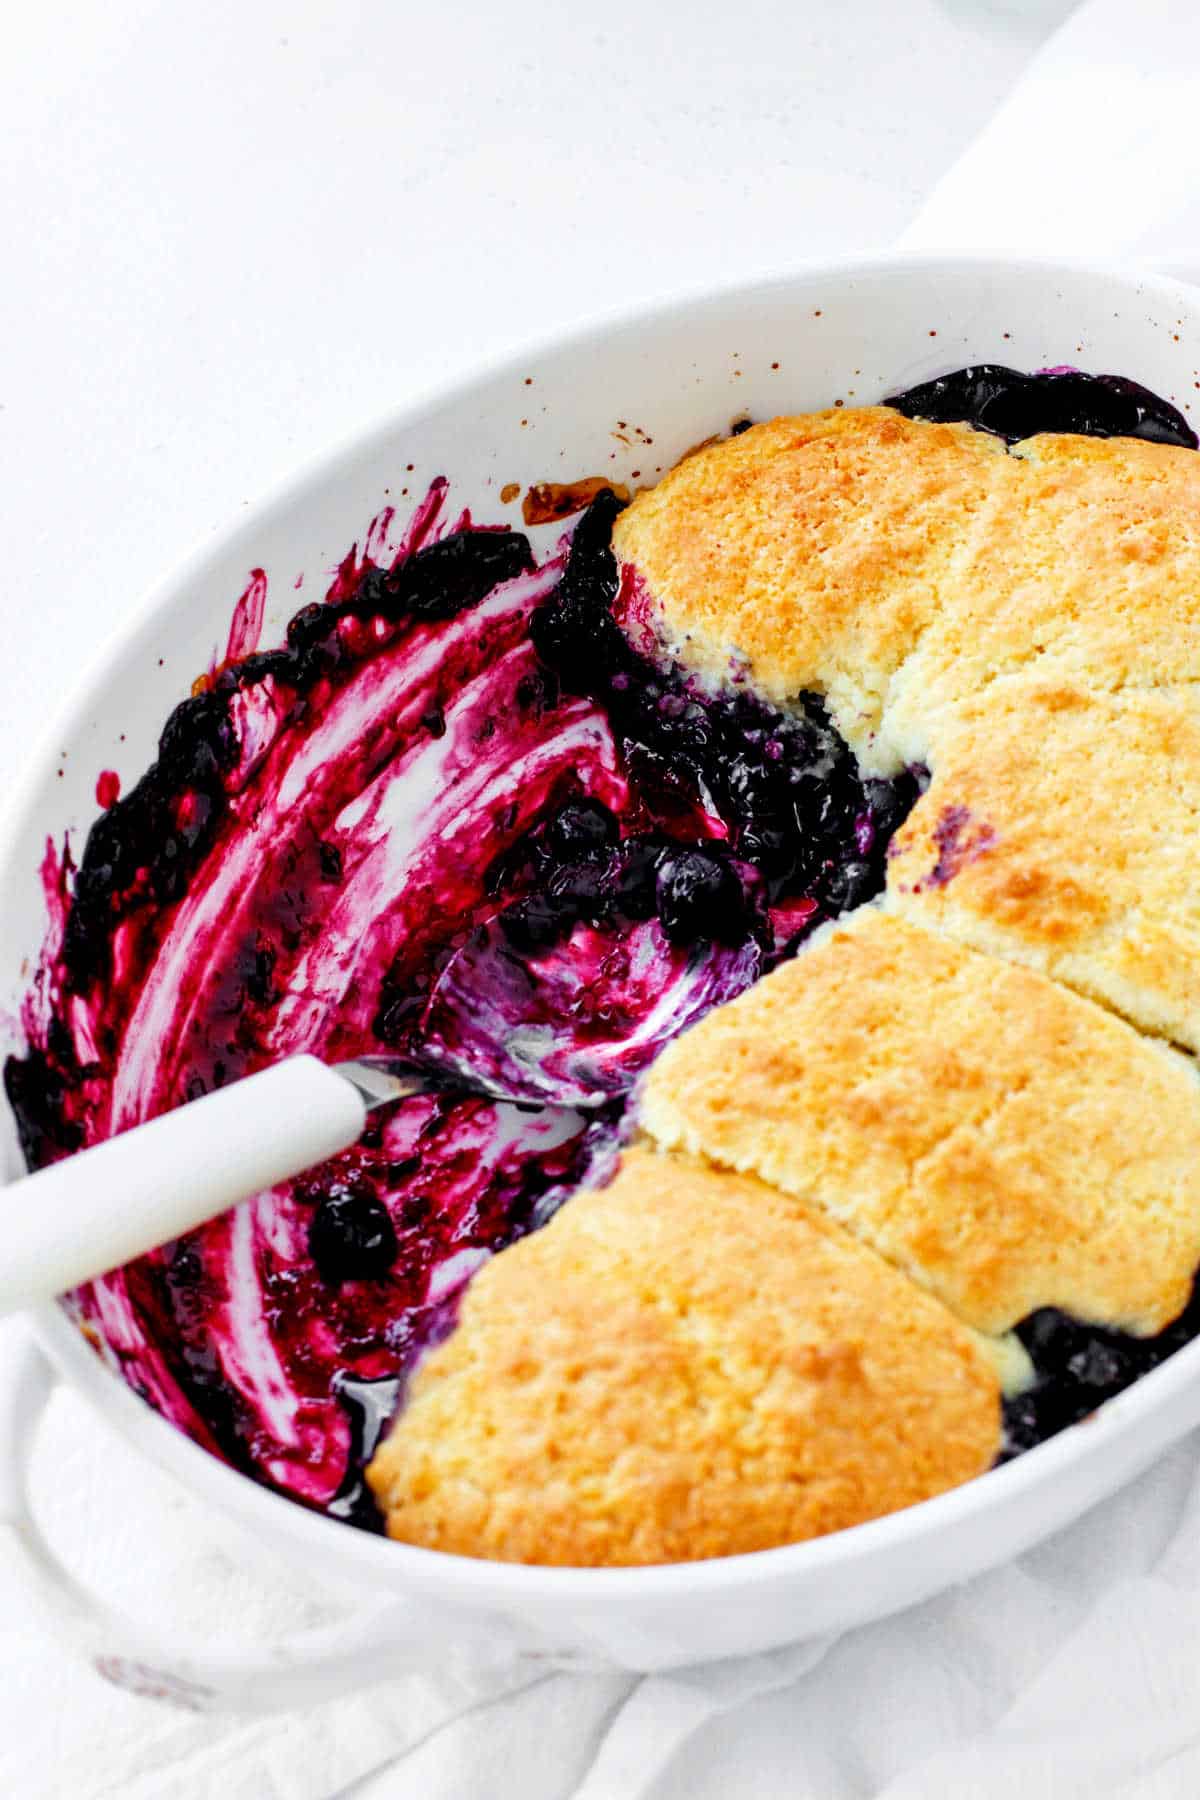 White dish with blueberry cobbler, spoon inside, white surface